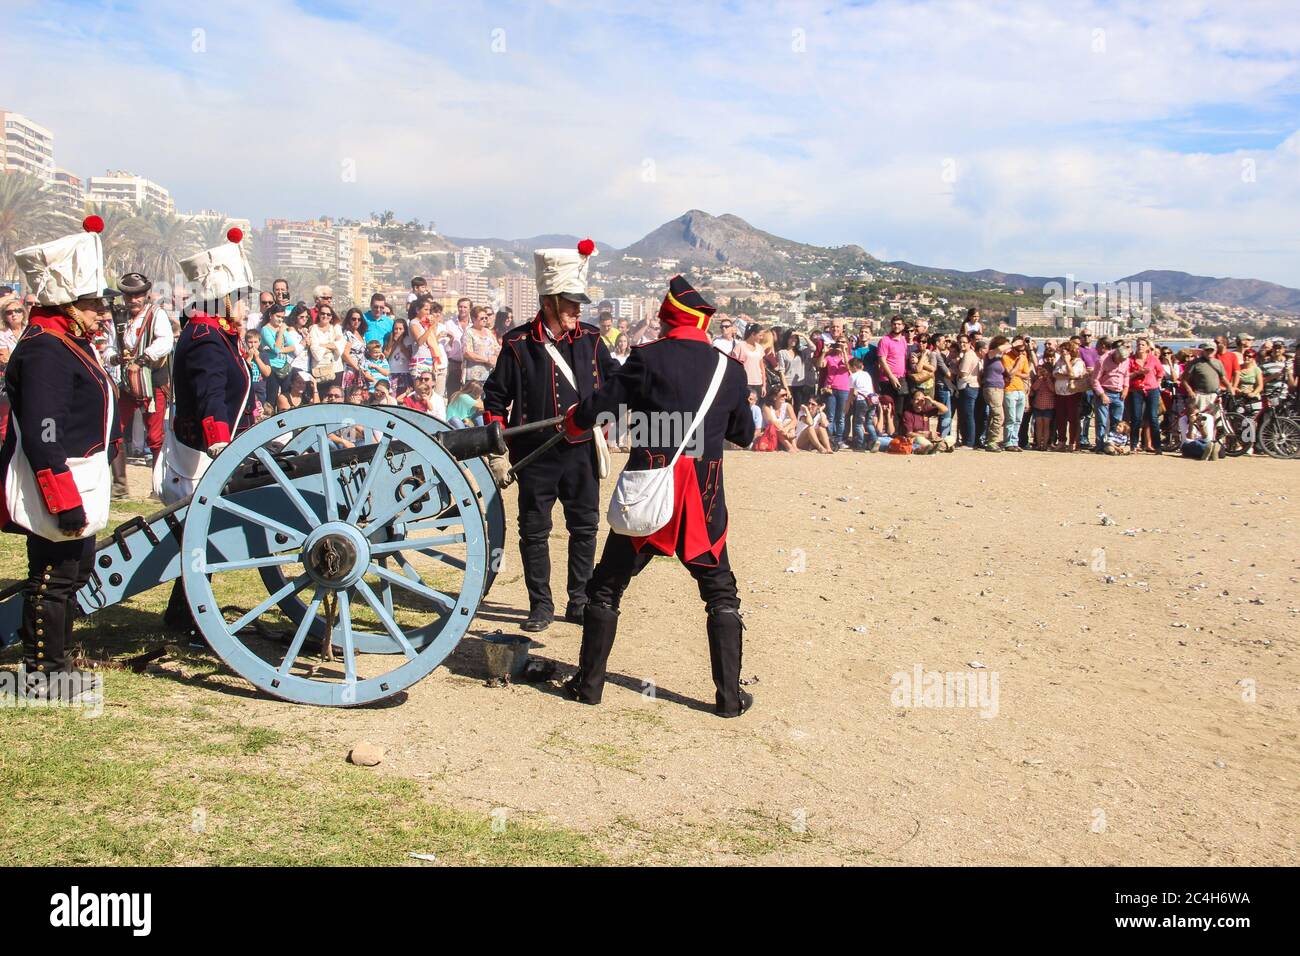 Malaga, Spain - October 26, 2014: 18th century french soldiers loading a cannon with gunpowder. Men and women reenactors. The crowd waits around. Hist Stock Photo